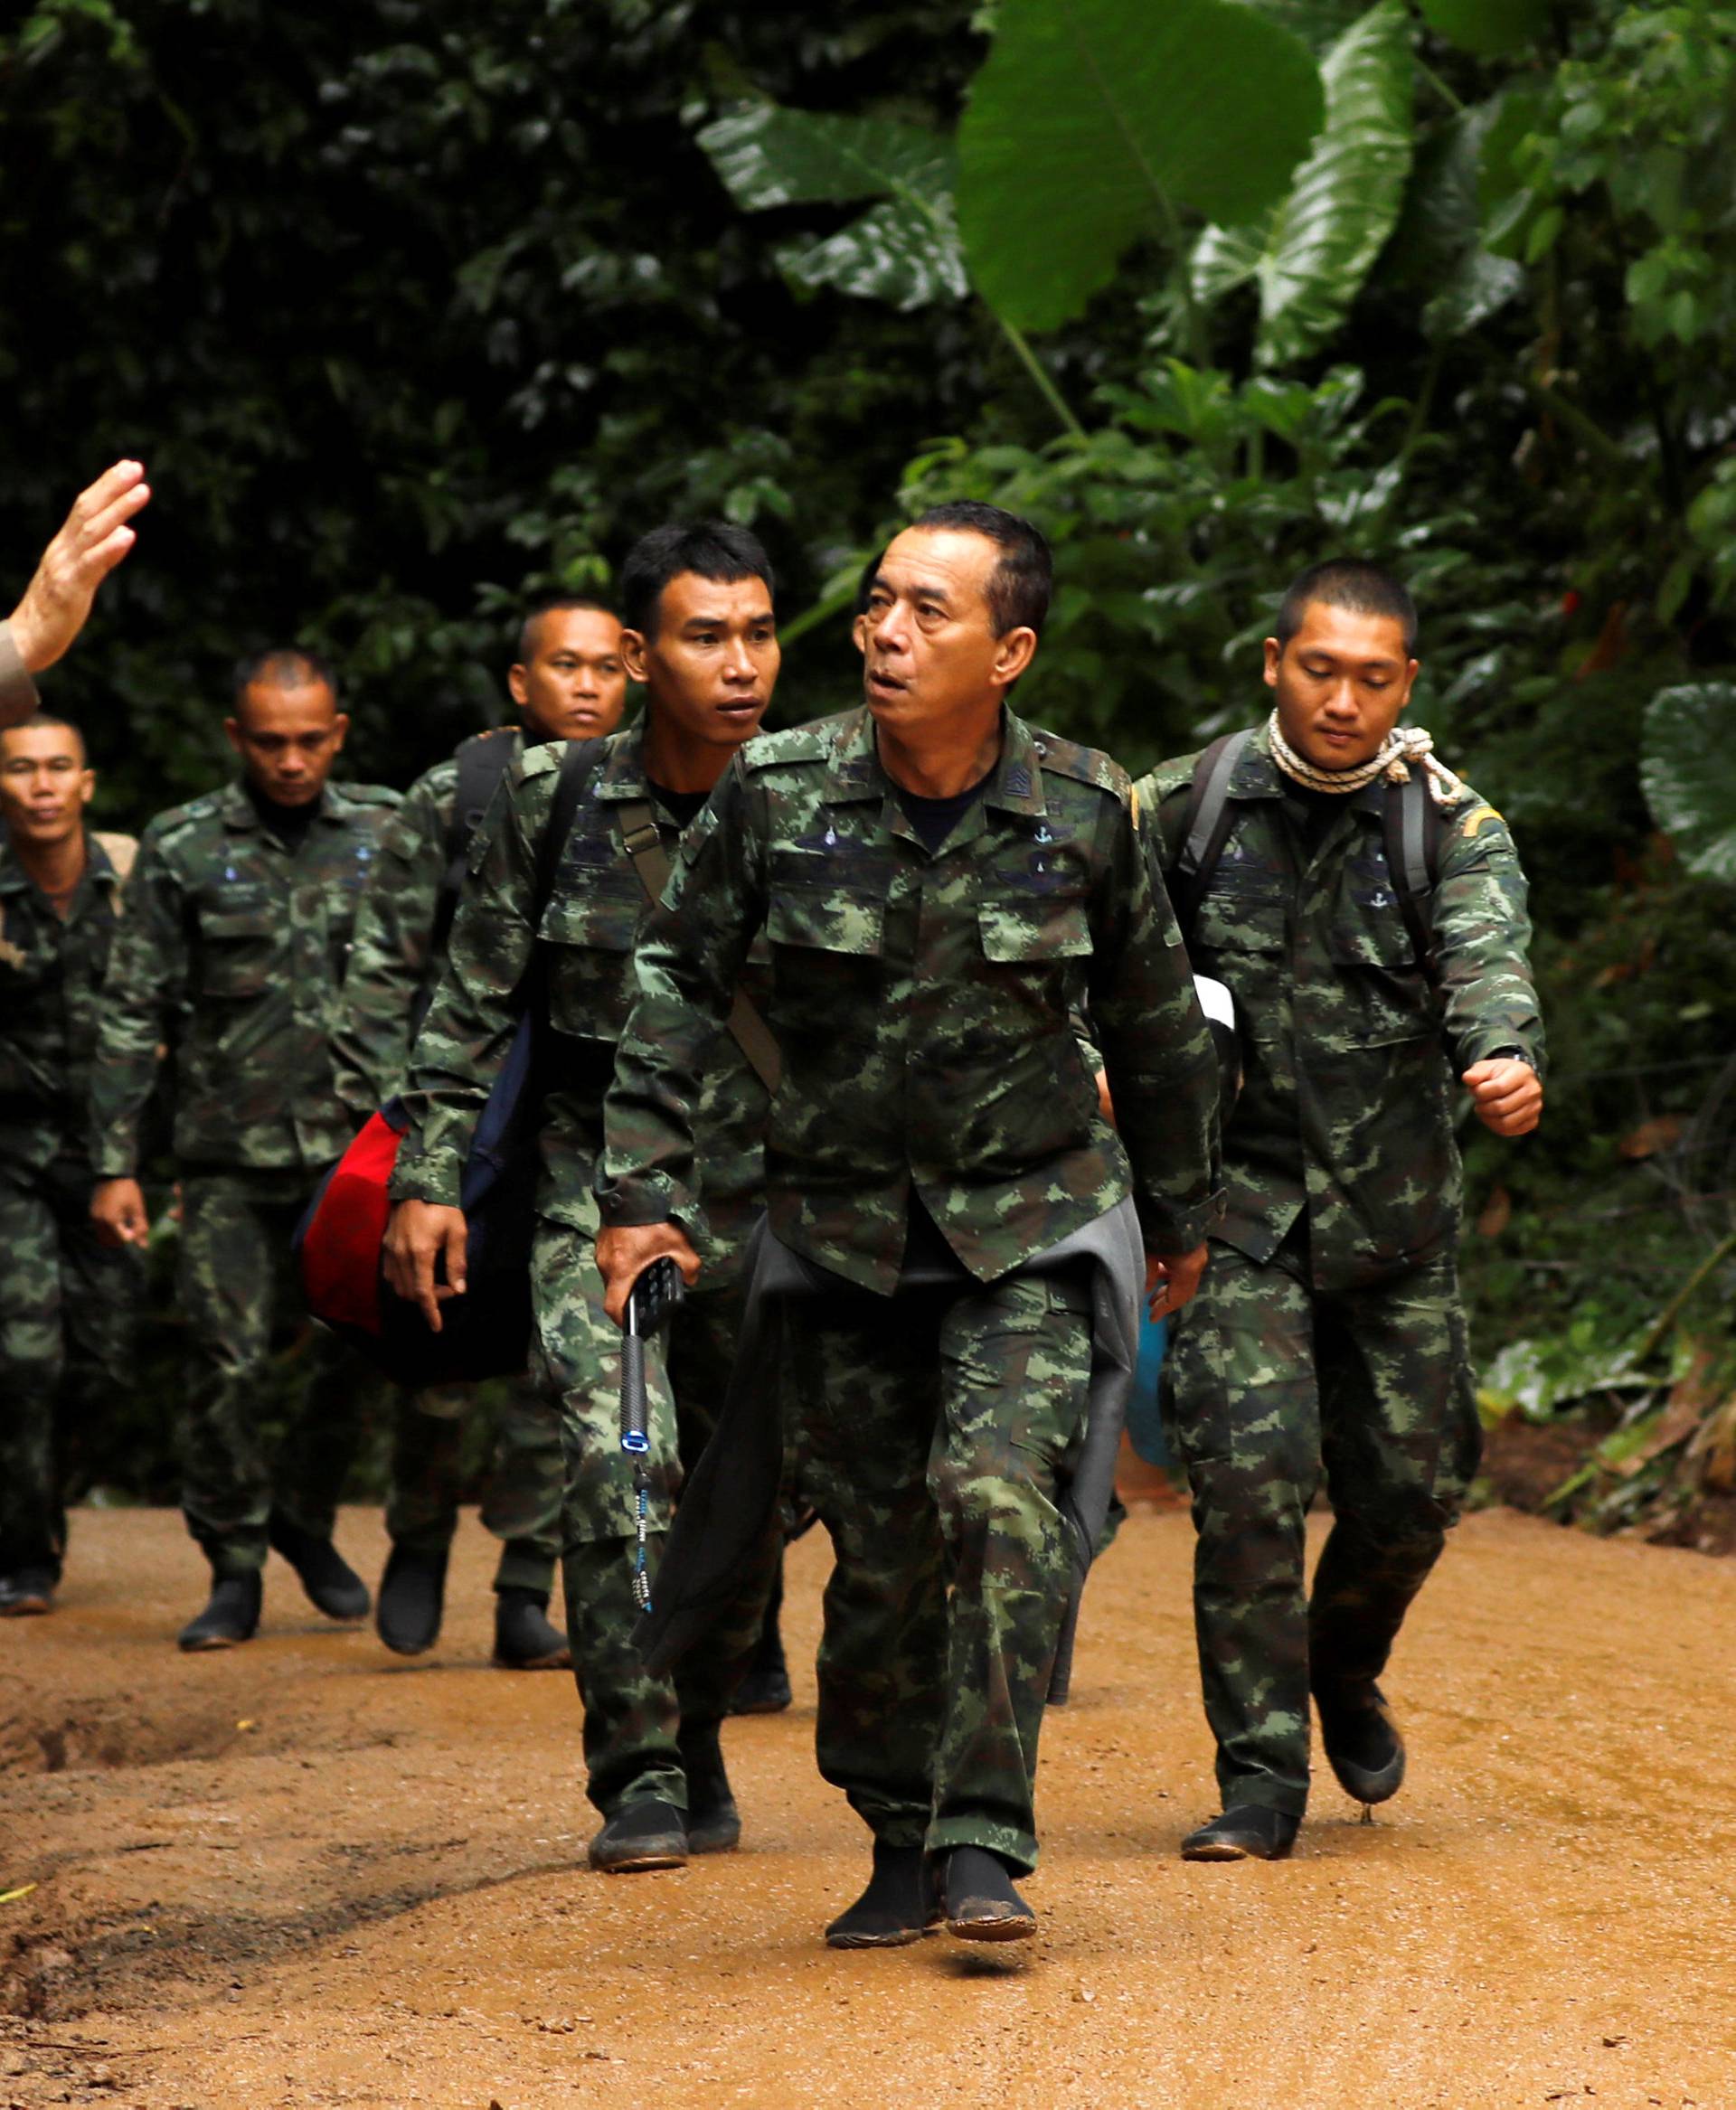 Soldiers arrive outside the Tham Luang cave complex, where 12 schoolboys and their soccer coach are trapped inside a flooded cave, in the northern province of Chiang Rai